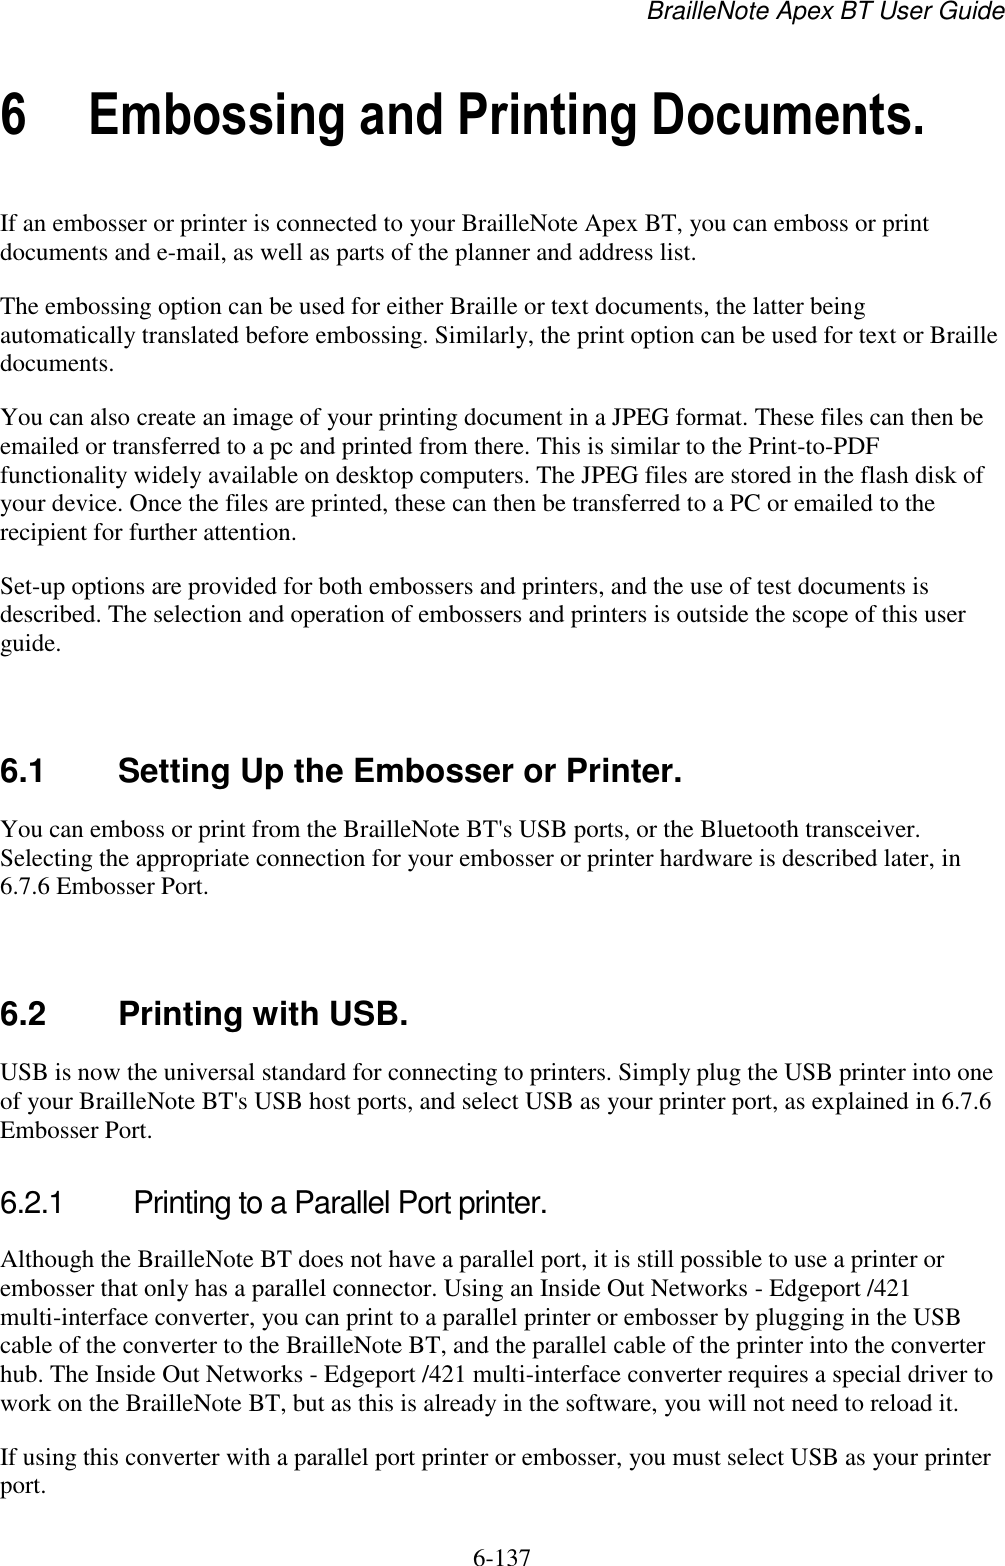 BrailleNote Apex BT User Guide   6-137   6 Embossing and Printing Documents. If an embosser or printer is connected to your BrailleNote Apex BT, you can emboss or print documents and e-mail, as well as parts of the planner and address list. The embossing option can be used for either Braille or text documents, the latter being automatically translated before embossing. Similarly, the print option can be used for text or Braille documents. You can also create an image of your printing document in a JPEG format. These files can then be emailed or transferred to a pc and printed from there. This is similar to the Print-to-PDF functionality widely available on desktop computers. The JPEG files are stored in the flash disk of your device. Once the files are printed, these can then be transferred to a PC or emailed to the recipient for further attention.  Set-up options are provided for both embossers and printers, and the use of test documents is described. The selection and operation of embossers and printers is outside the scope of this user guide.   6.1  Setting Up the Embosser or Printer. You can emboss or print from the BrailleNote BT&apos;s USB ports, or the Bluetooth transceiver. Selecting the appropriate connection for your embosser or printer hardware is described later, in 6.7.6 Embosser Port.    6.2  Printing with USB. USB is now the universal standard for connecting to printers. Simply plug the USB printer into one of your BrailleNote BT&apos;s USB host ports, and select USB as your printer port, as explained in 6.7.6 Embosser Port.  6.2.1  Printing to a Parallel Port printer. Although the BrailleNote BT does not have a parallel port, it is still possible to use a printer or embosser that only has a parallel connector. Using an Inside Out Networks - Edgeport /421 multi-interface converter, you can print to a parallel printer or embosser by plugging in the USB cable of the converter to the BrailleNote BT, and the parallel cable of the printer into the converter hub. The Inside Out Networks - Edgeport /421 multi-interface converter requires a special driver to work on the BrailleNote BT, but as this is already in the software, you will not need to reload it.  If using this converter with a parallel port printer or embosser, you must select USB as your printer port.   